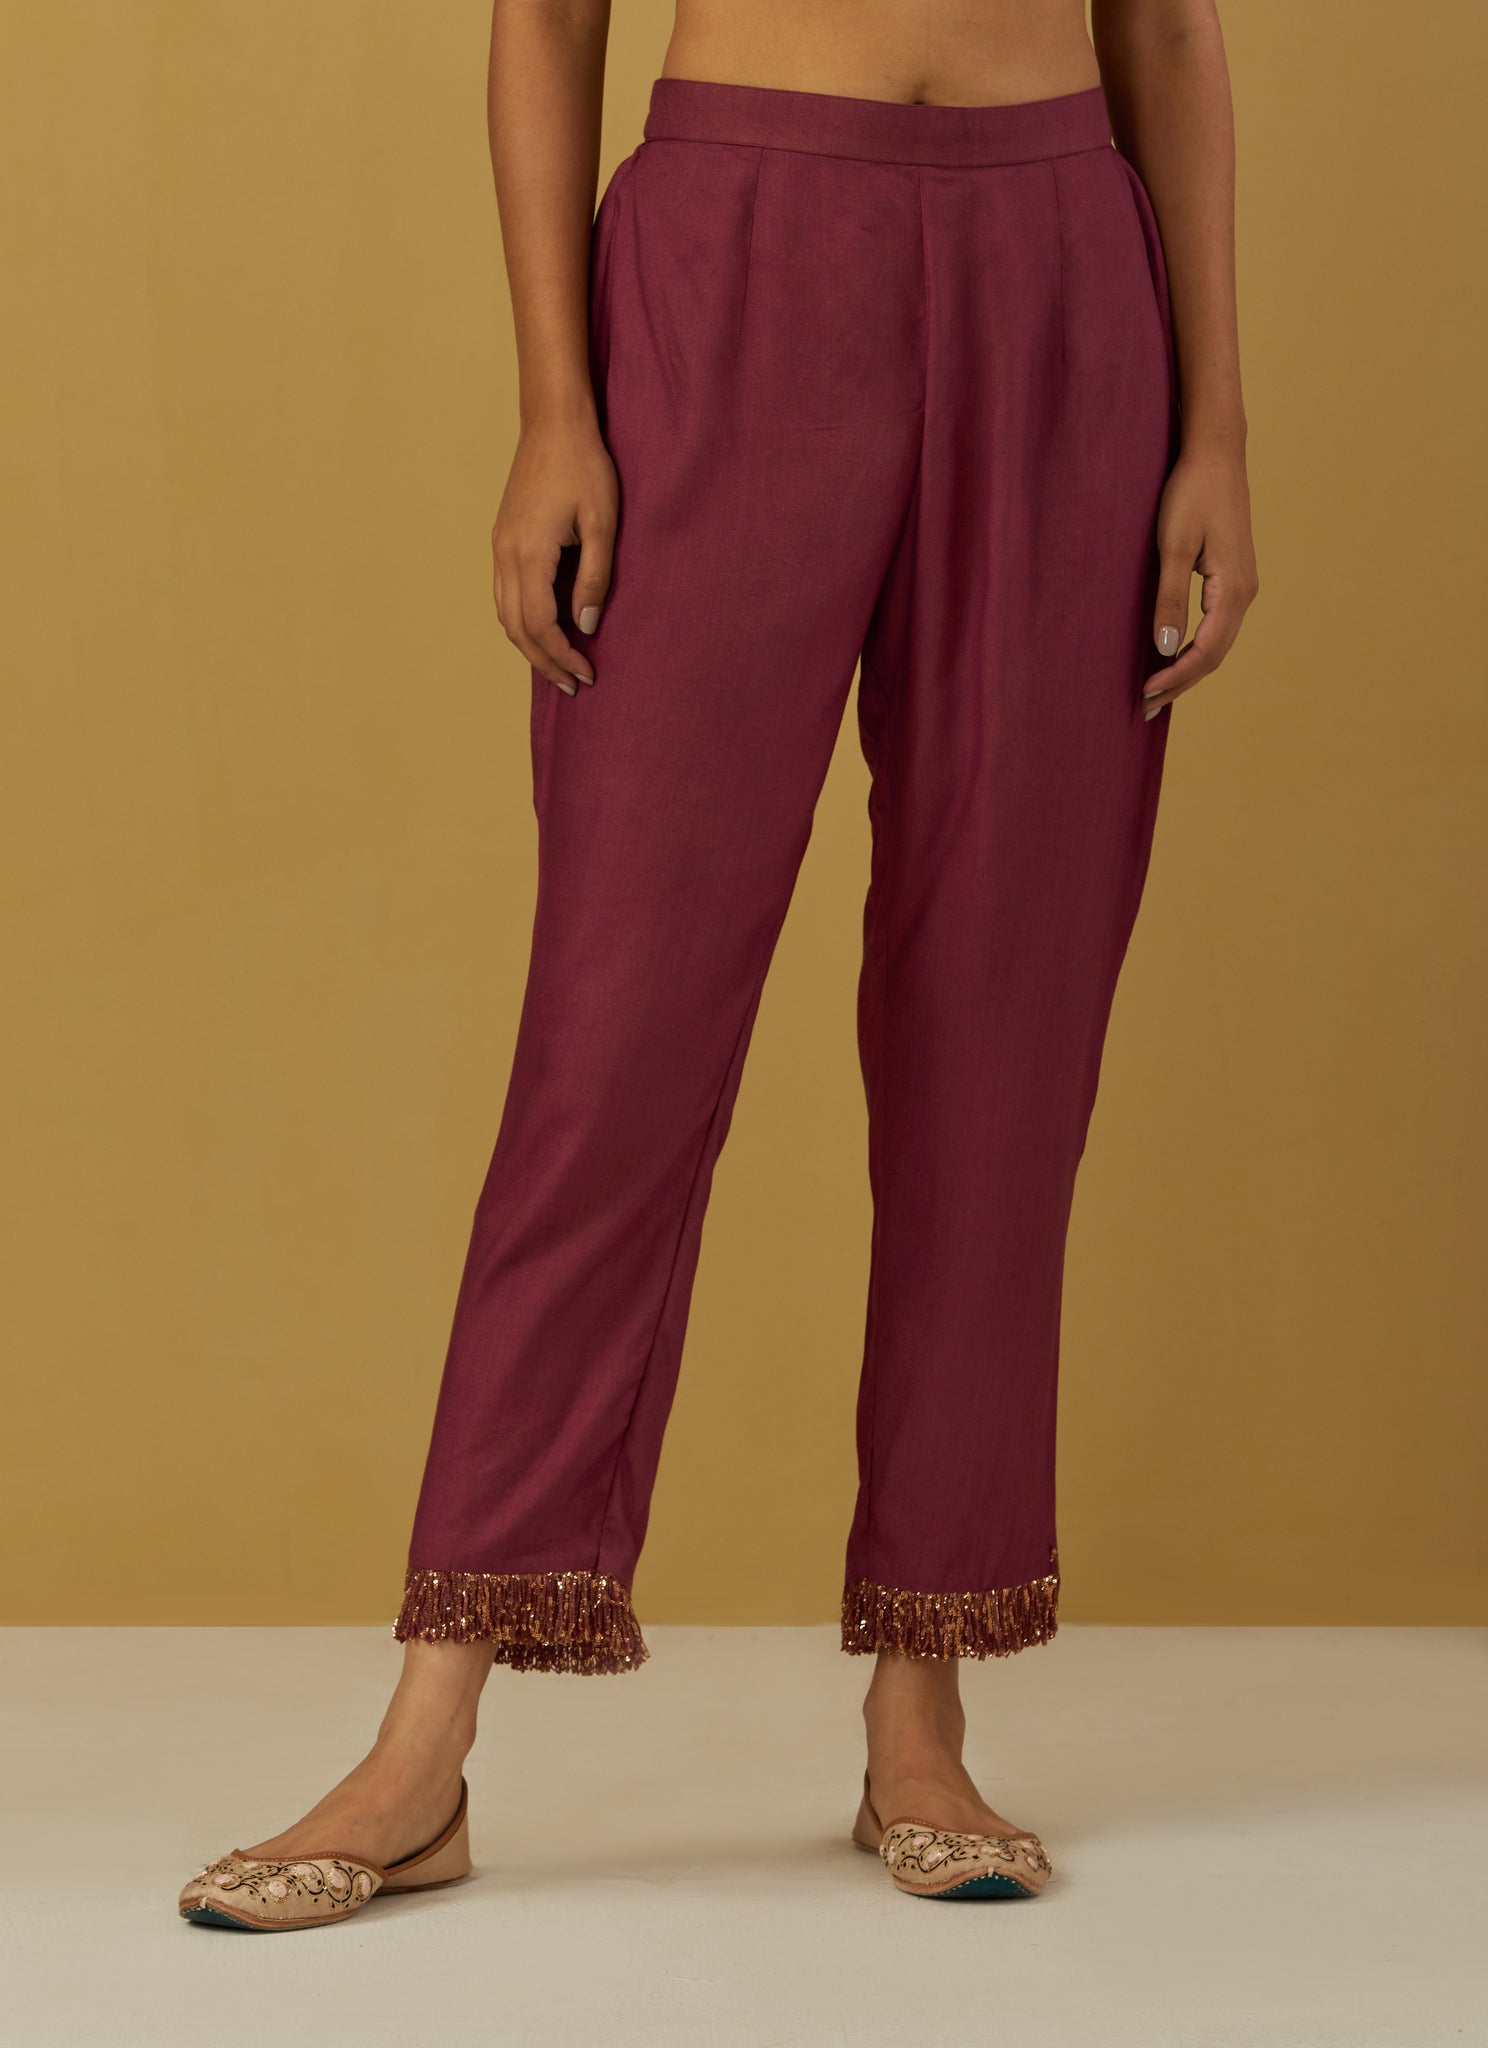 Maroon Cheese Cotton Pants with Lace